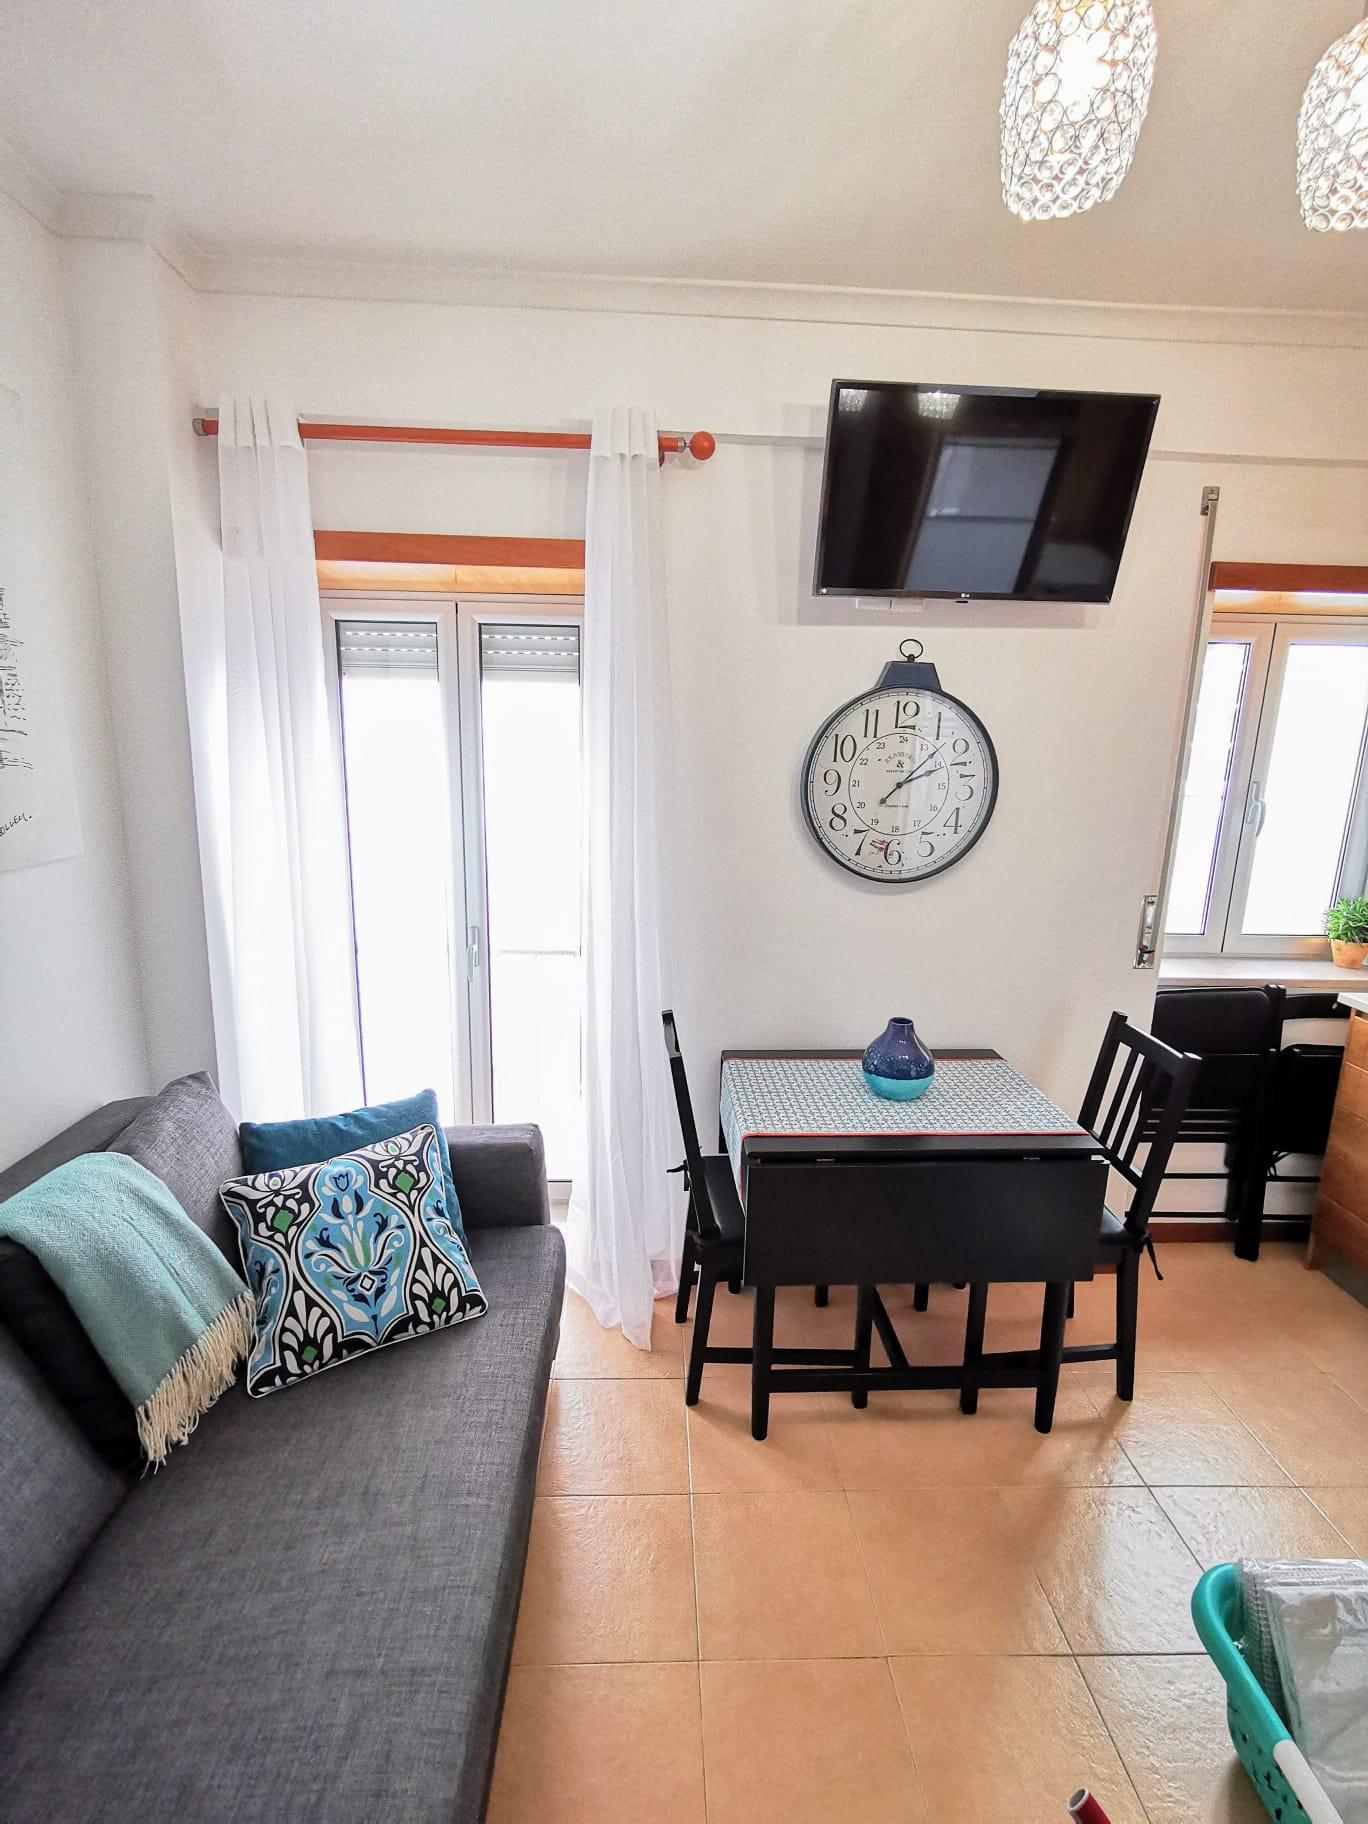 1 bedroom apartment just a few steps from Nazaré beach